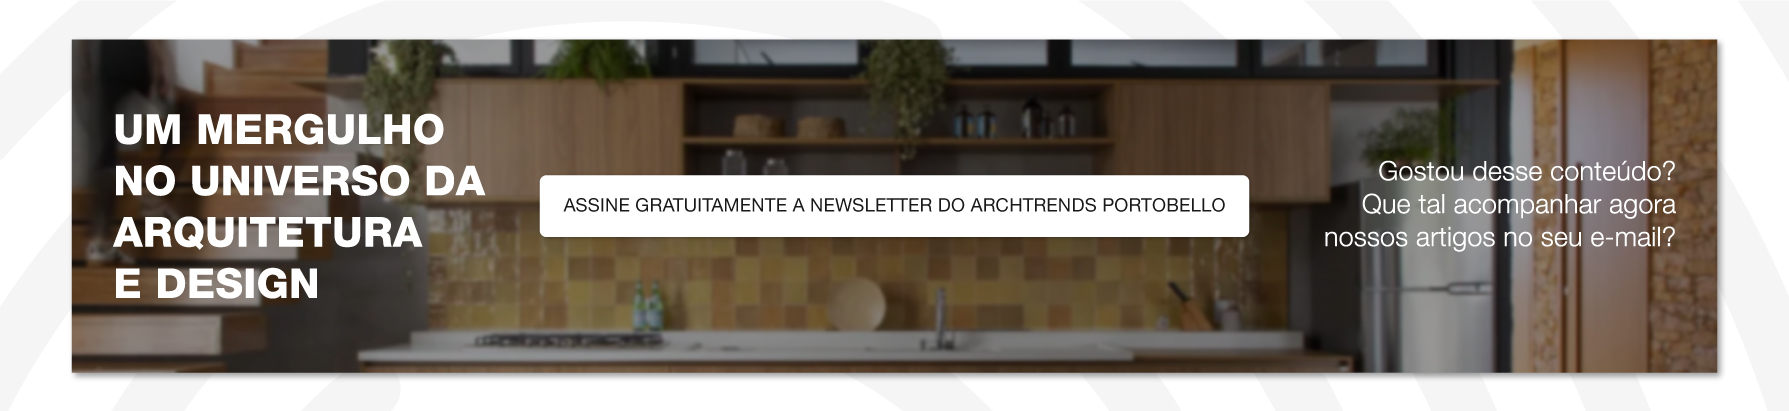 archtrends